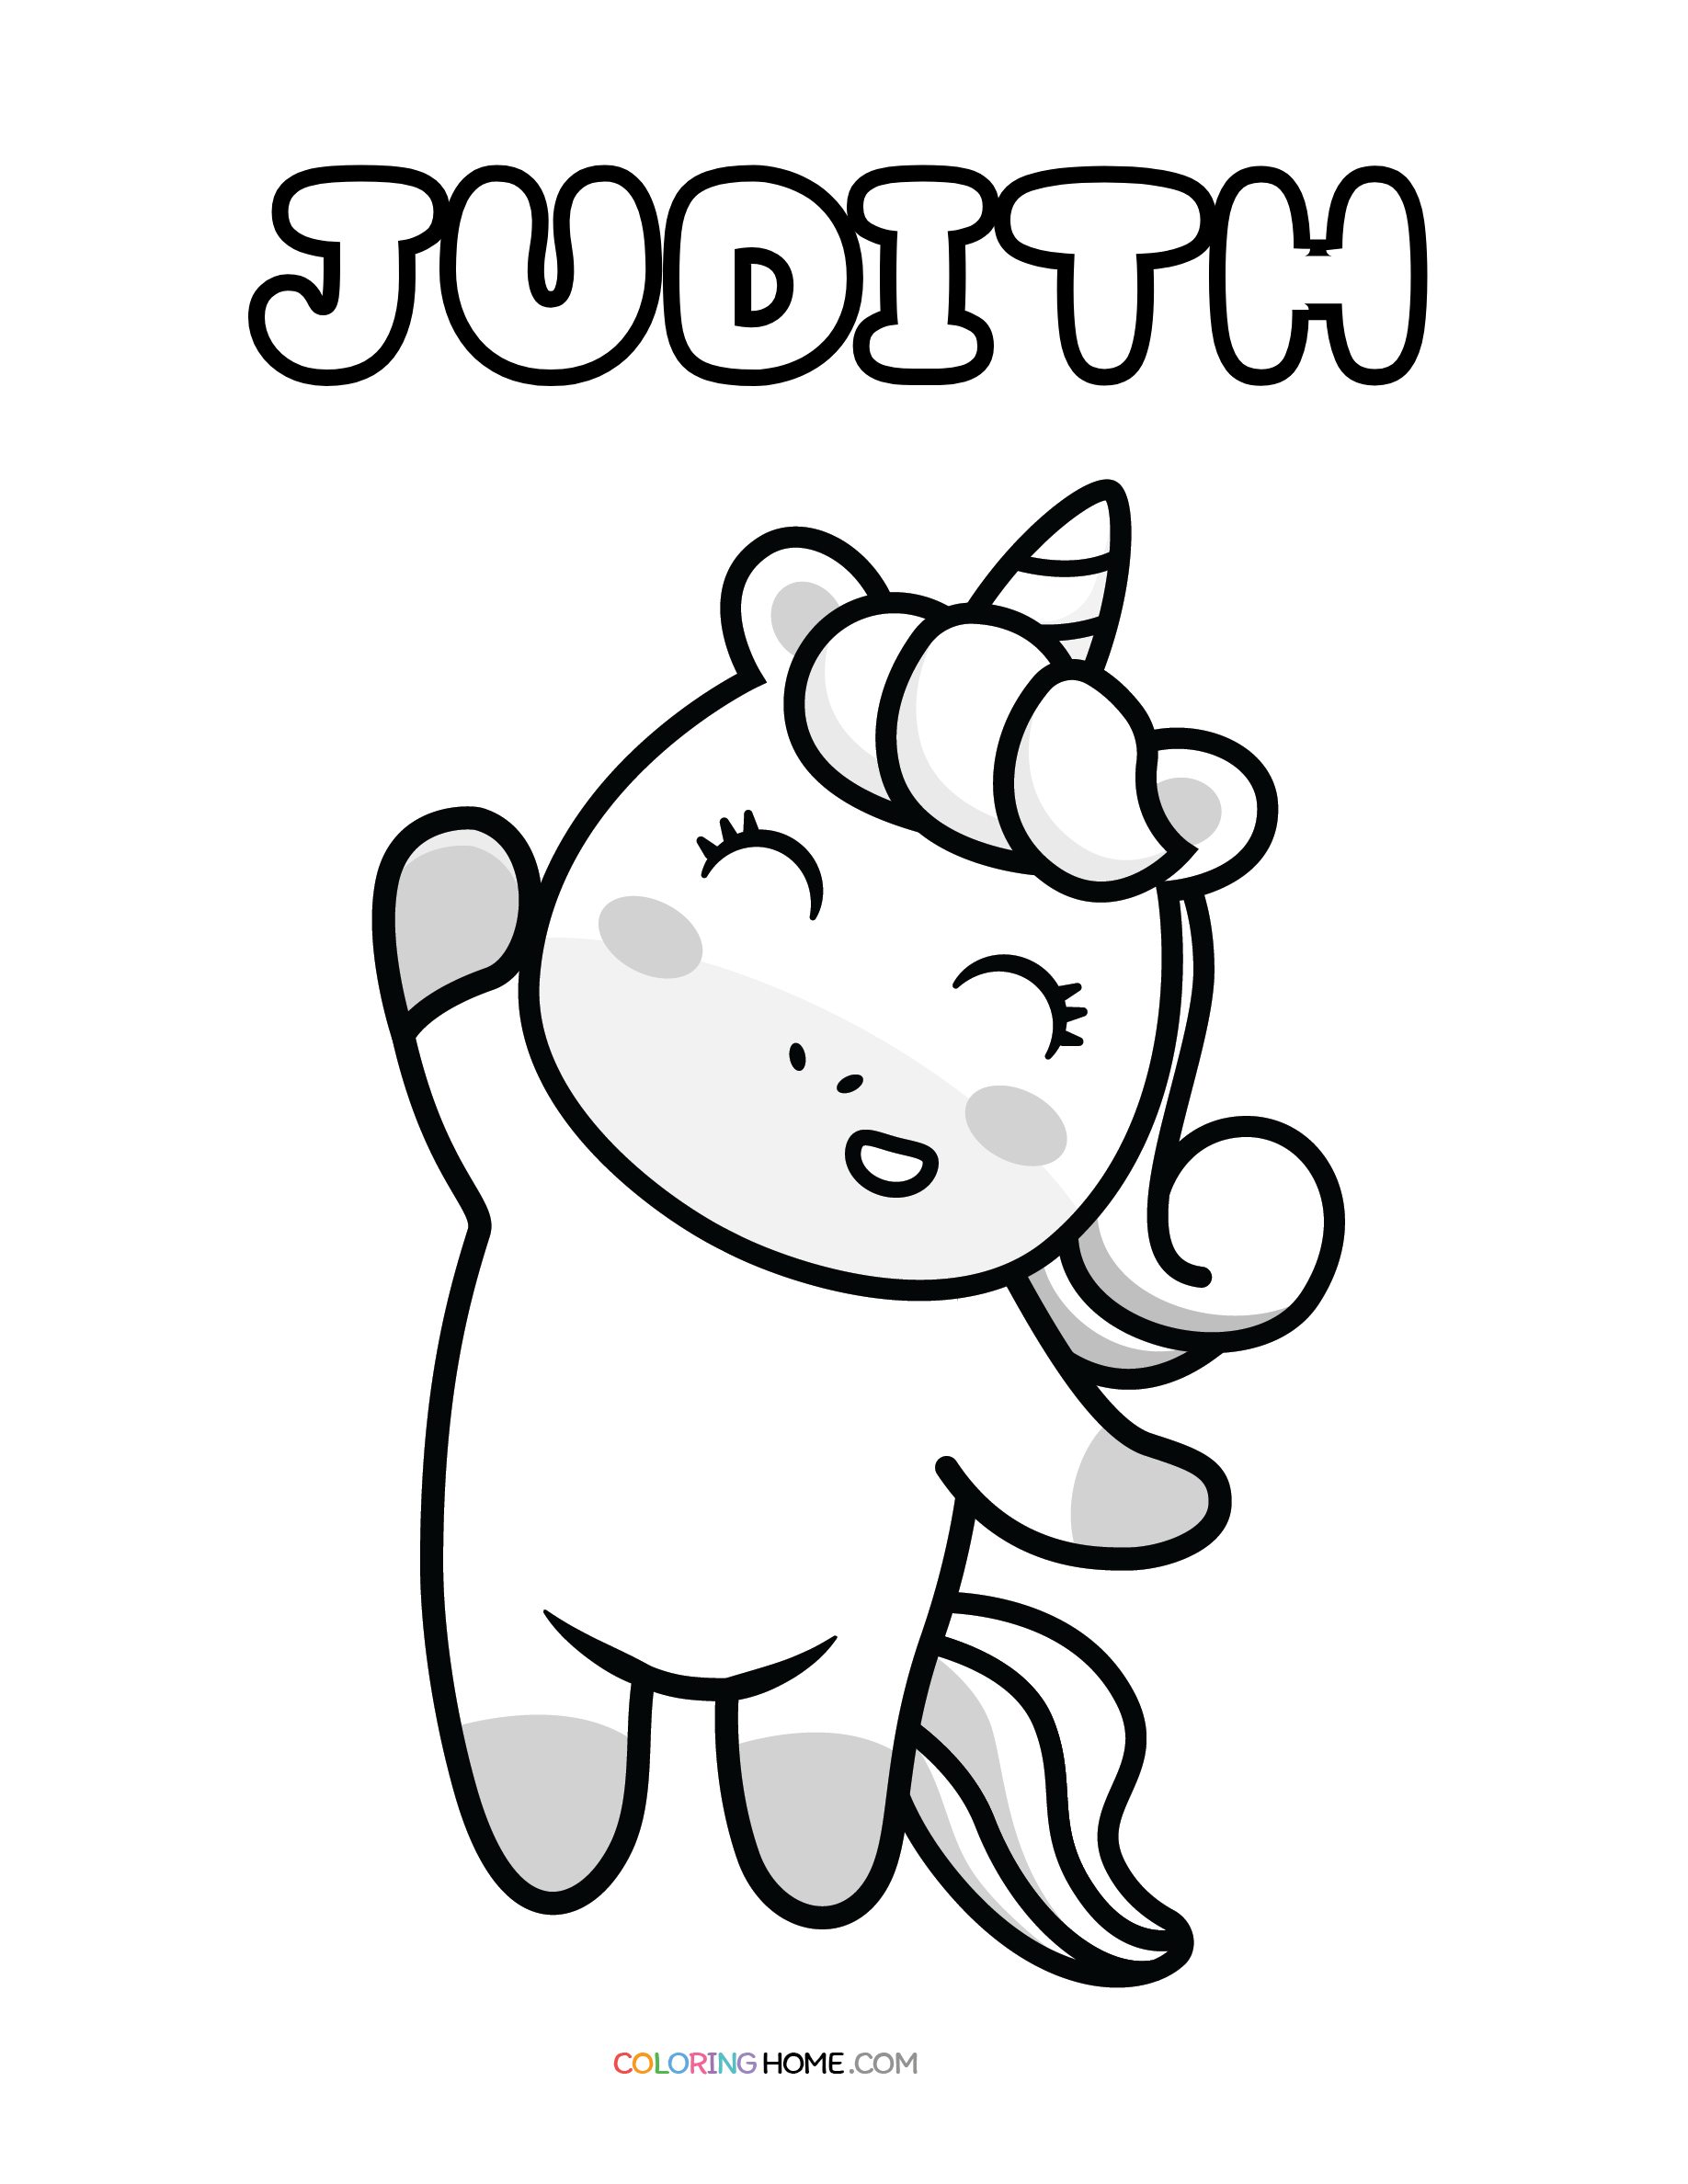 Judith unicorn coloring page